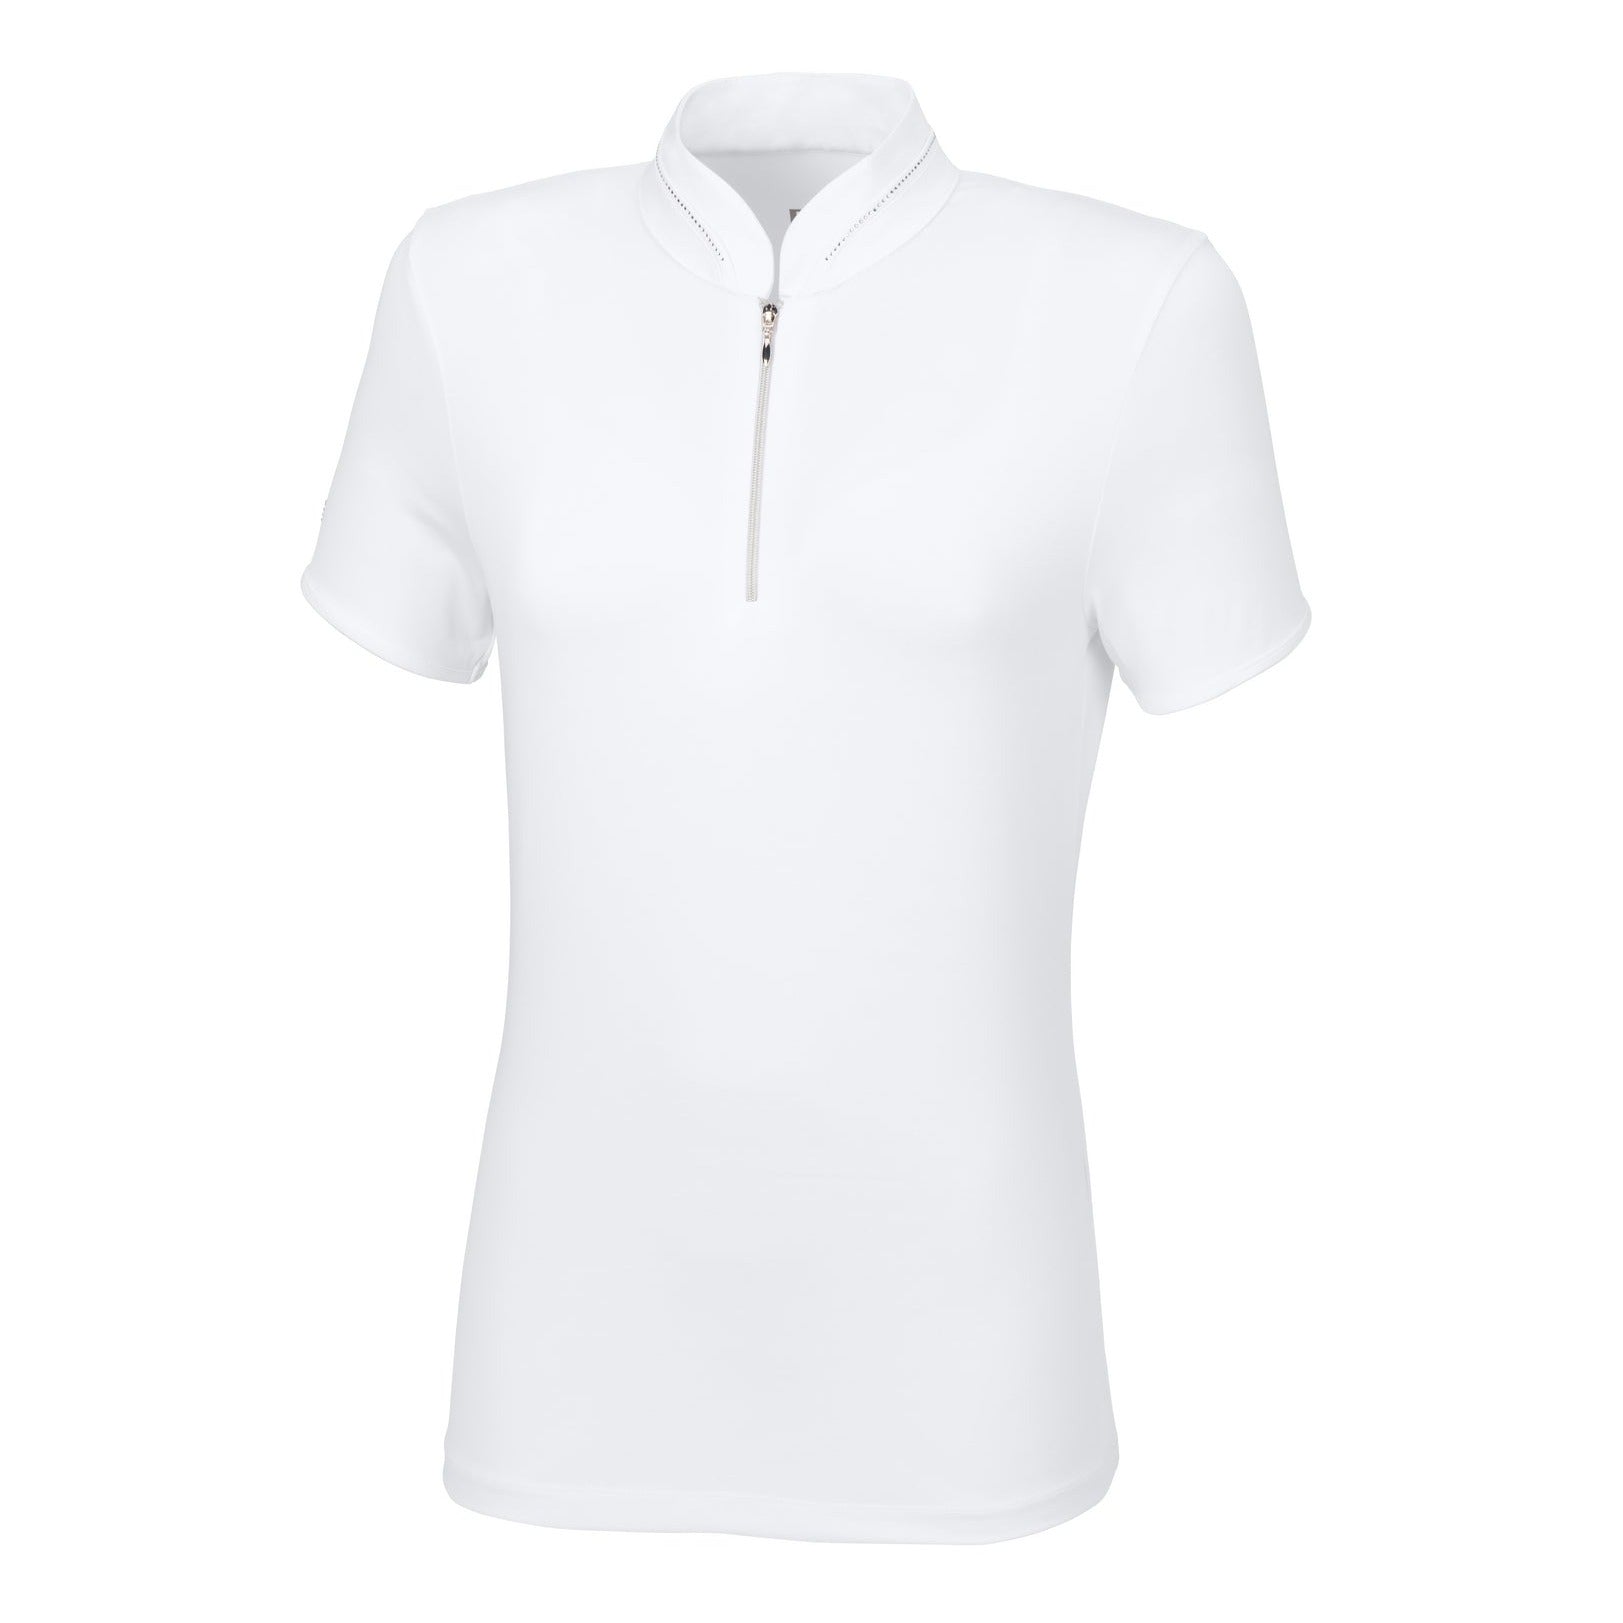 Pikeur Ladies Liyana Competion Shirt - White - 2 left UK8 and 16